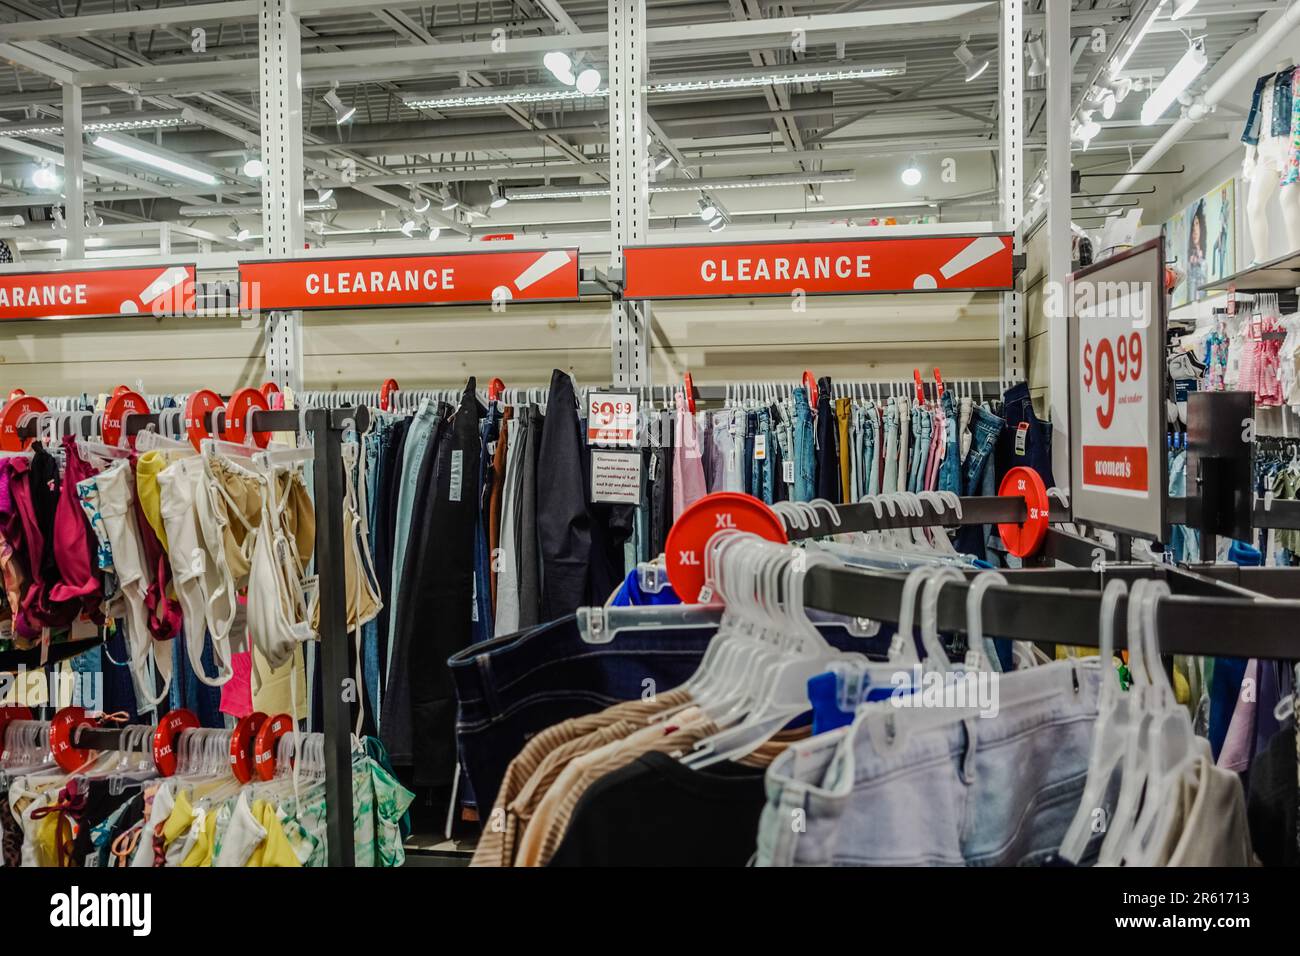 https://c8.alamy.com/comp/2R61713/clearance-section-of-a-clothing-store-2R61713.jpg